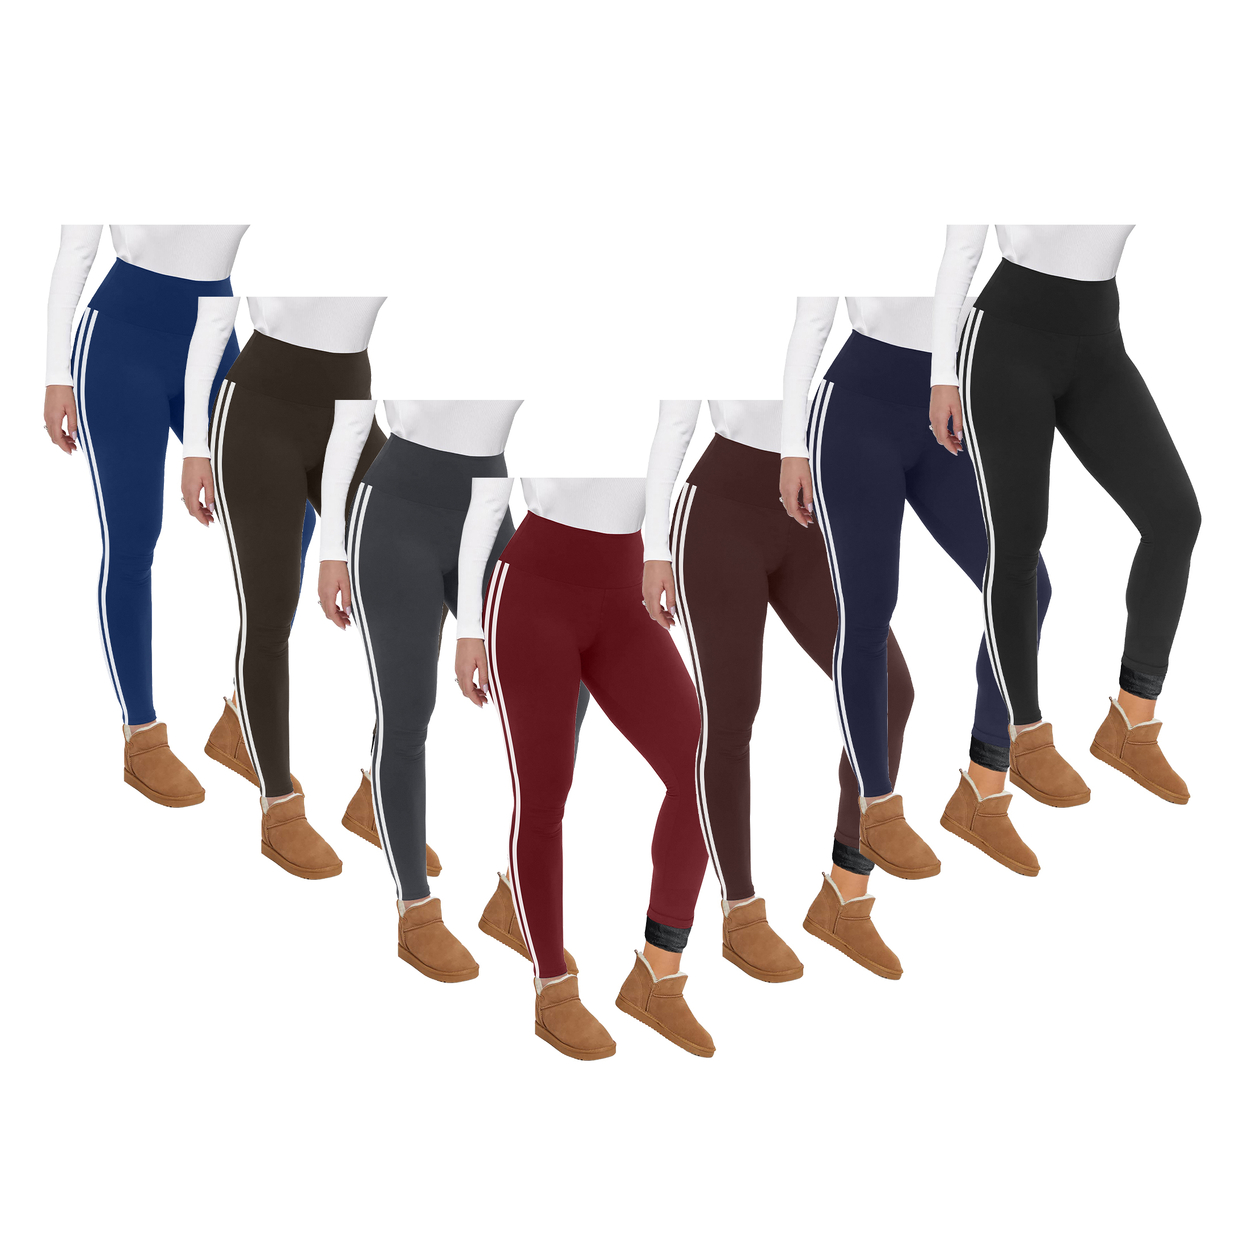 3-Pack: Women's Ultra Soft Winter Warm Cozy Striped Fur Lined Yoga Leggings - Assorted, X-large